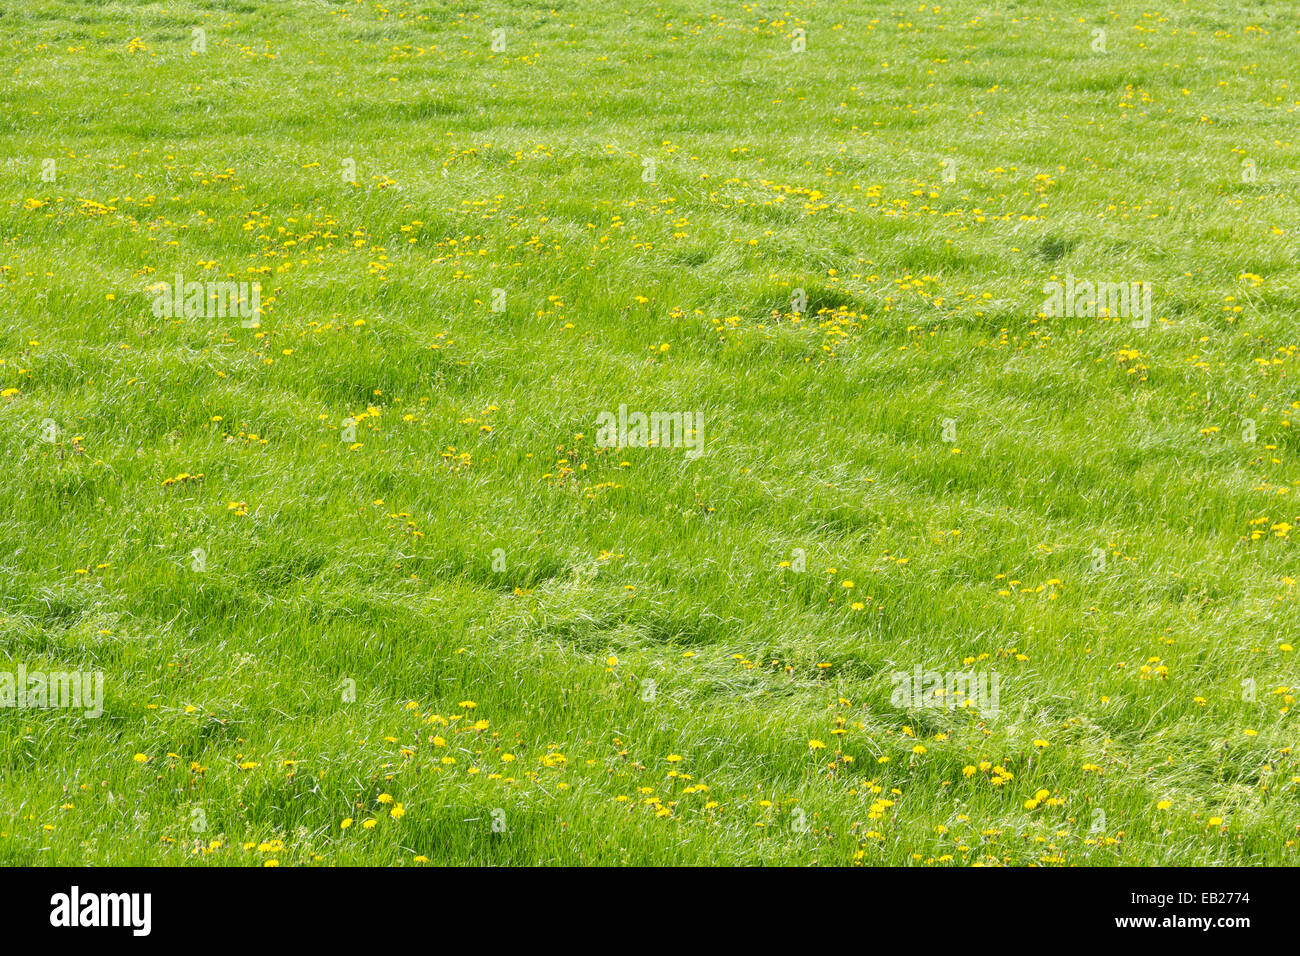 Meadow of lush grass and scattered dandelions in a field in north-west England in the early summer. Stock Photo